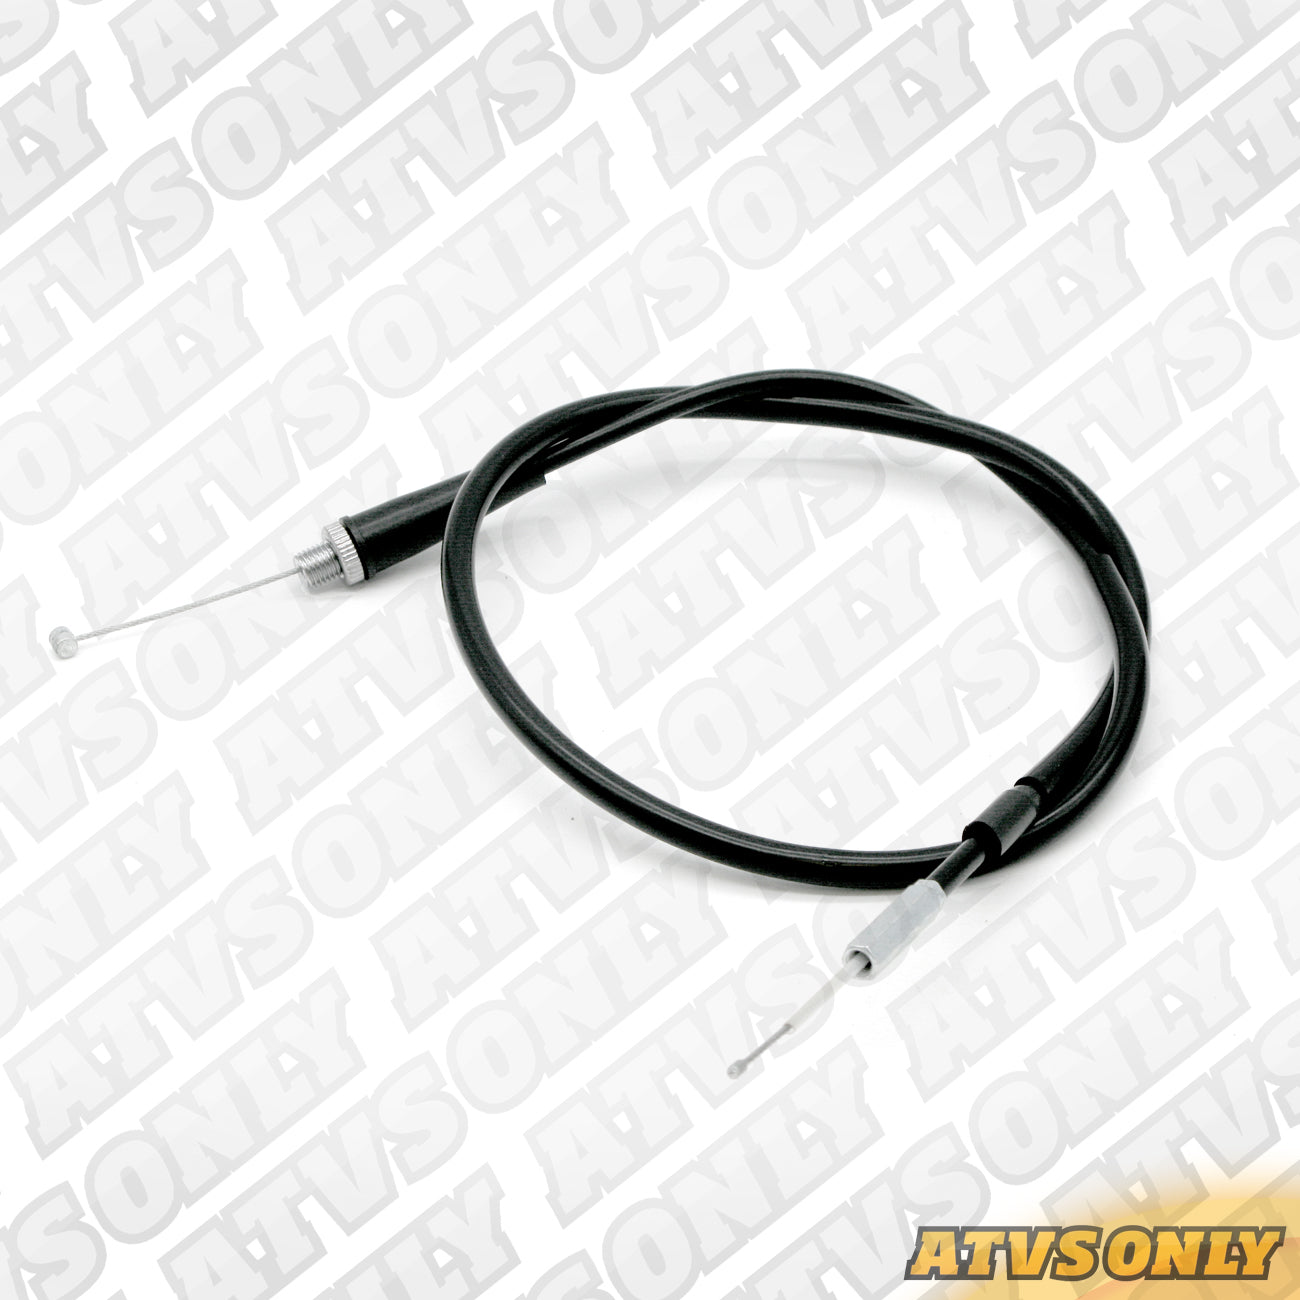 Cables – Replacement CR Pro Throttle Cable for Yamaha Raptor 700